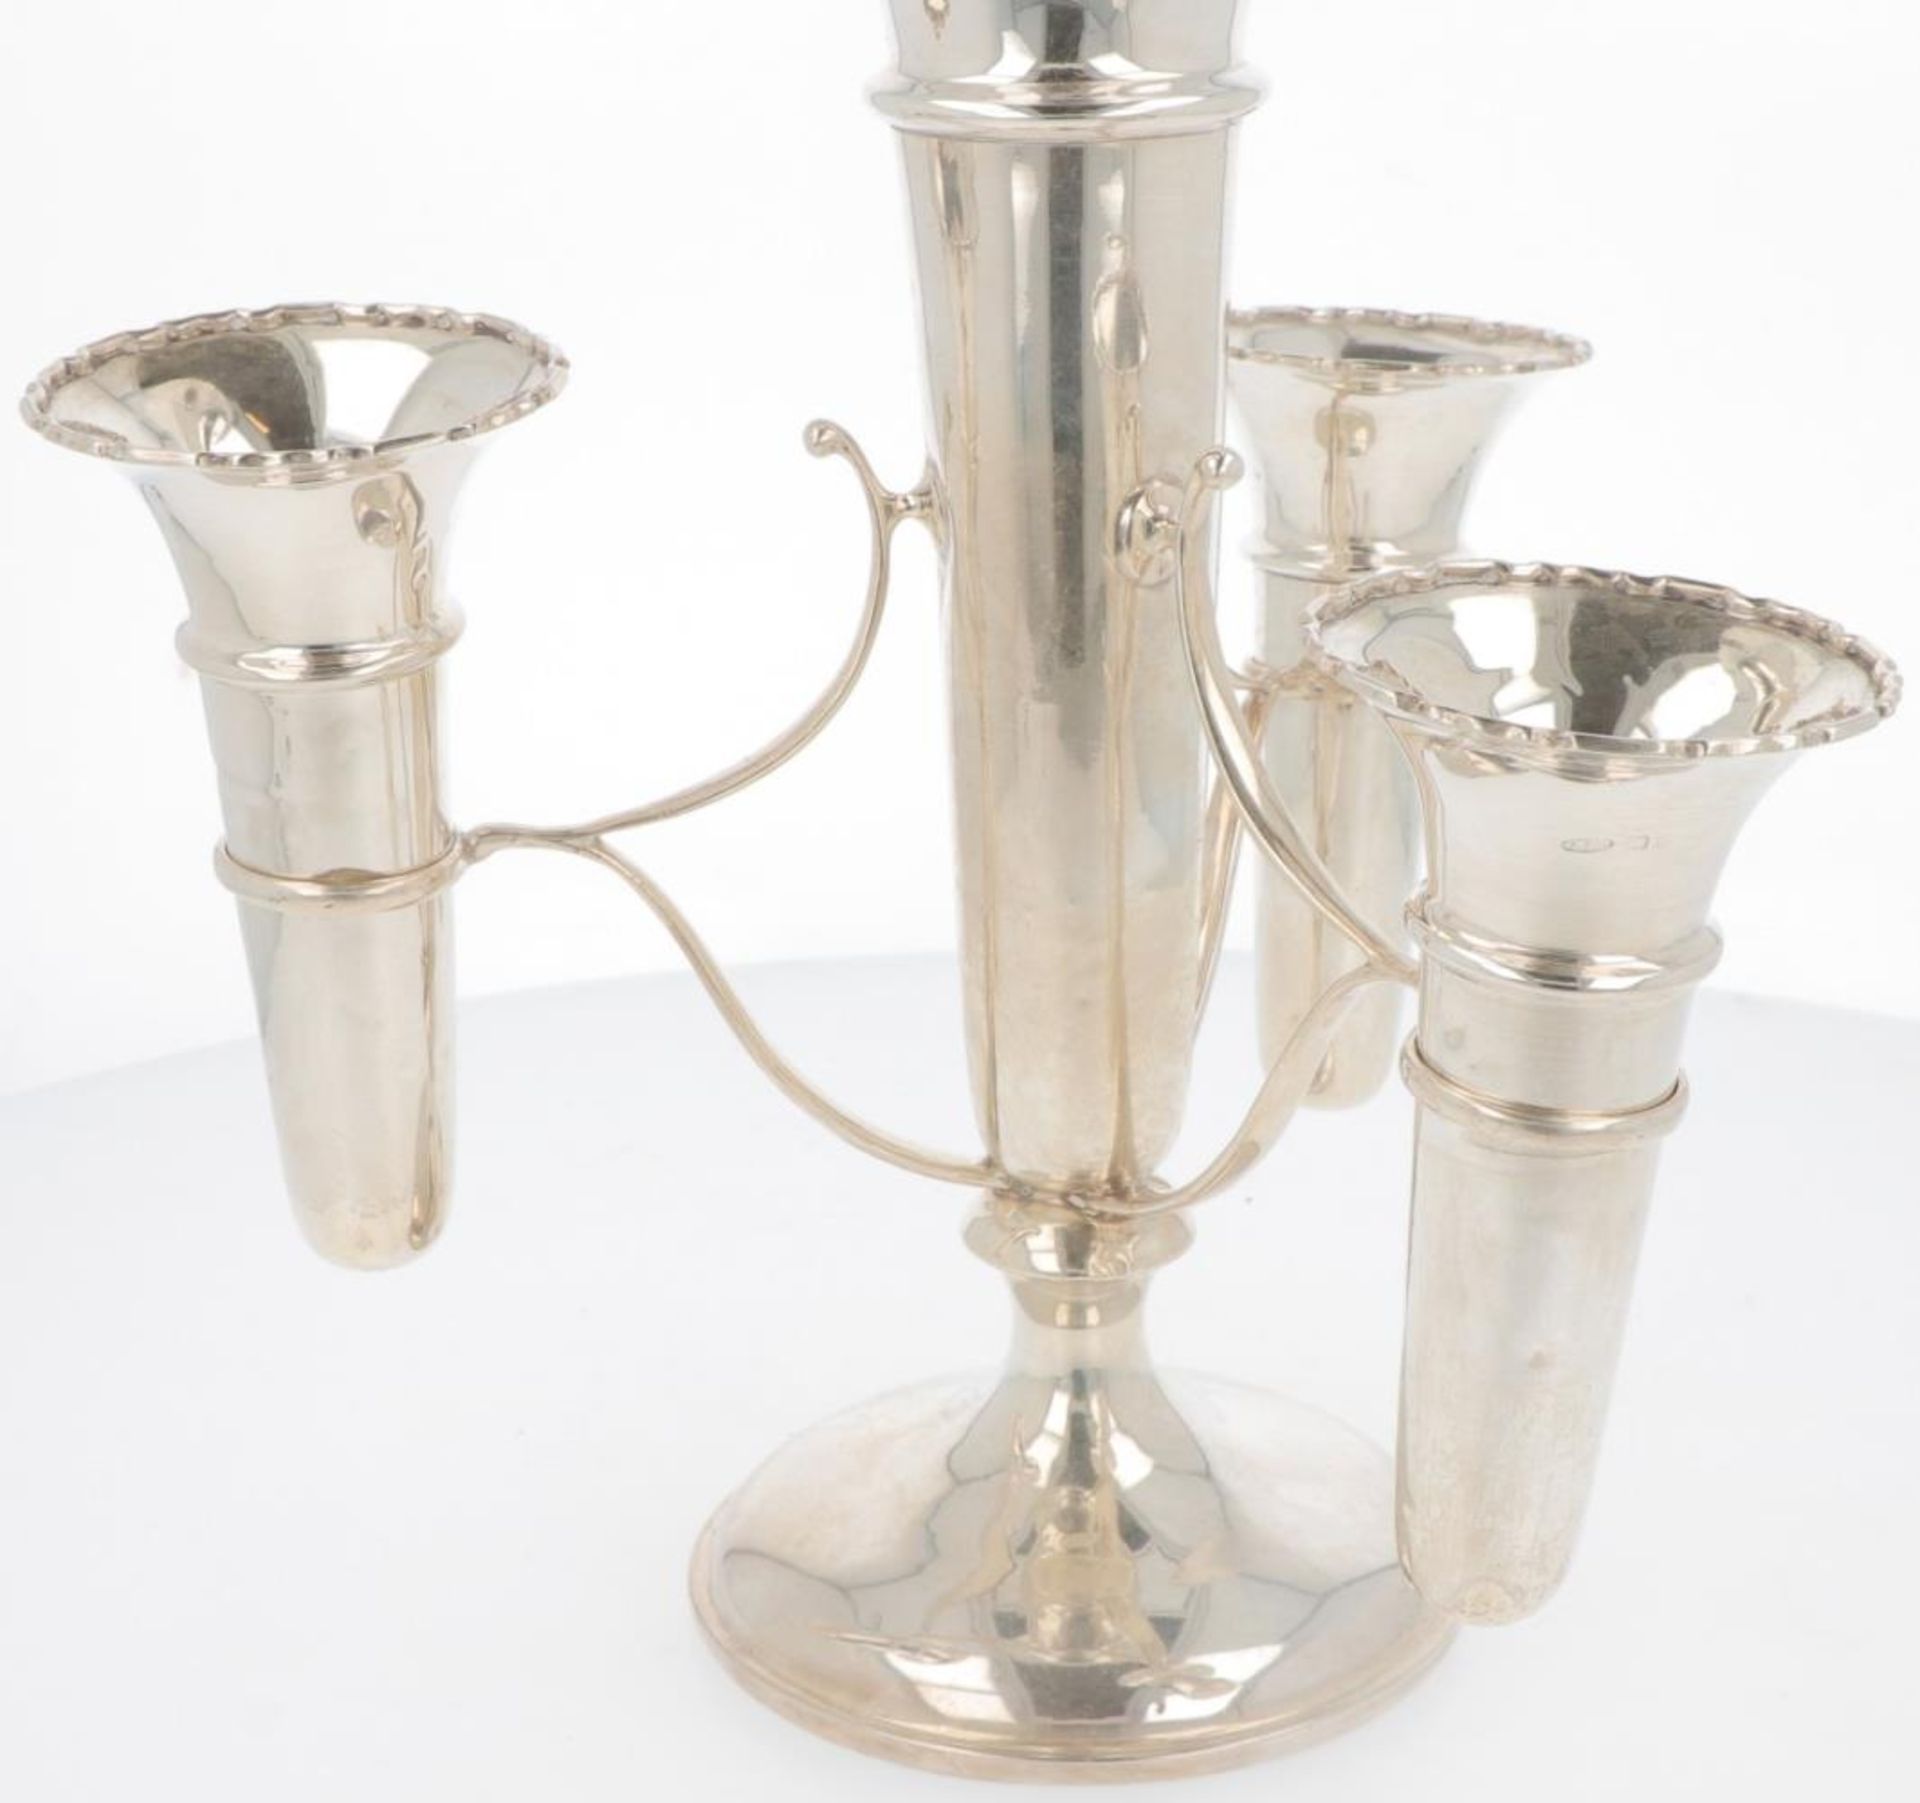 Epergne / table piece silver. - Image 2 of 3